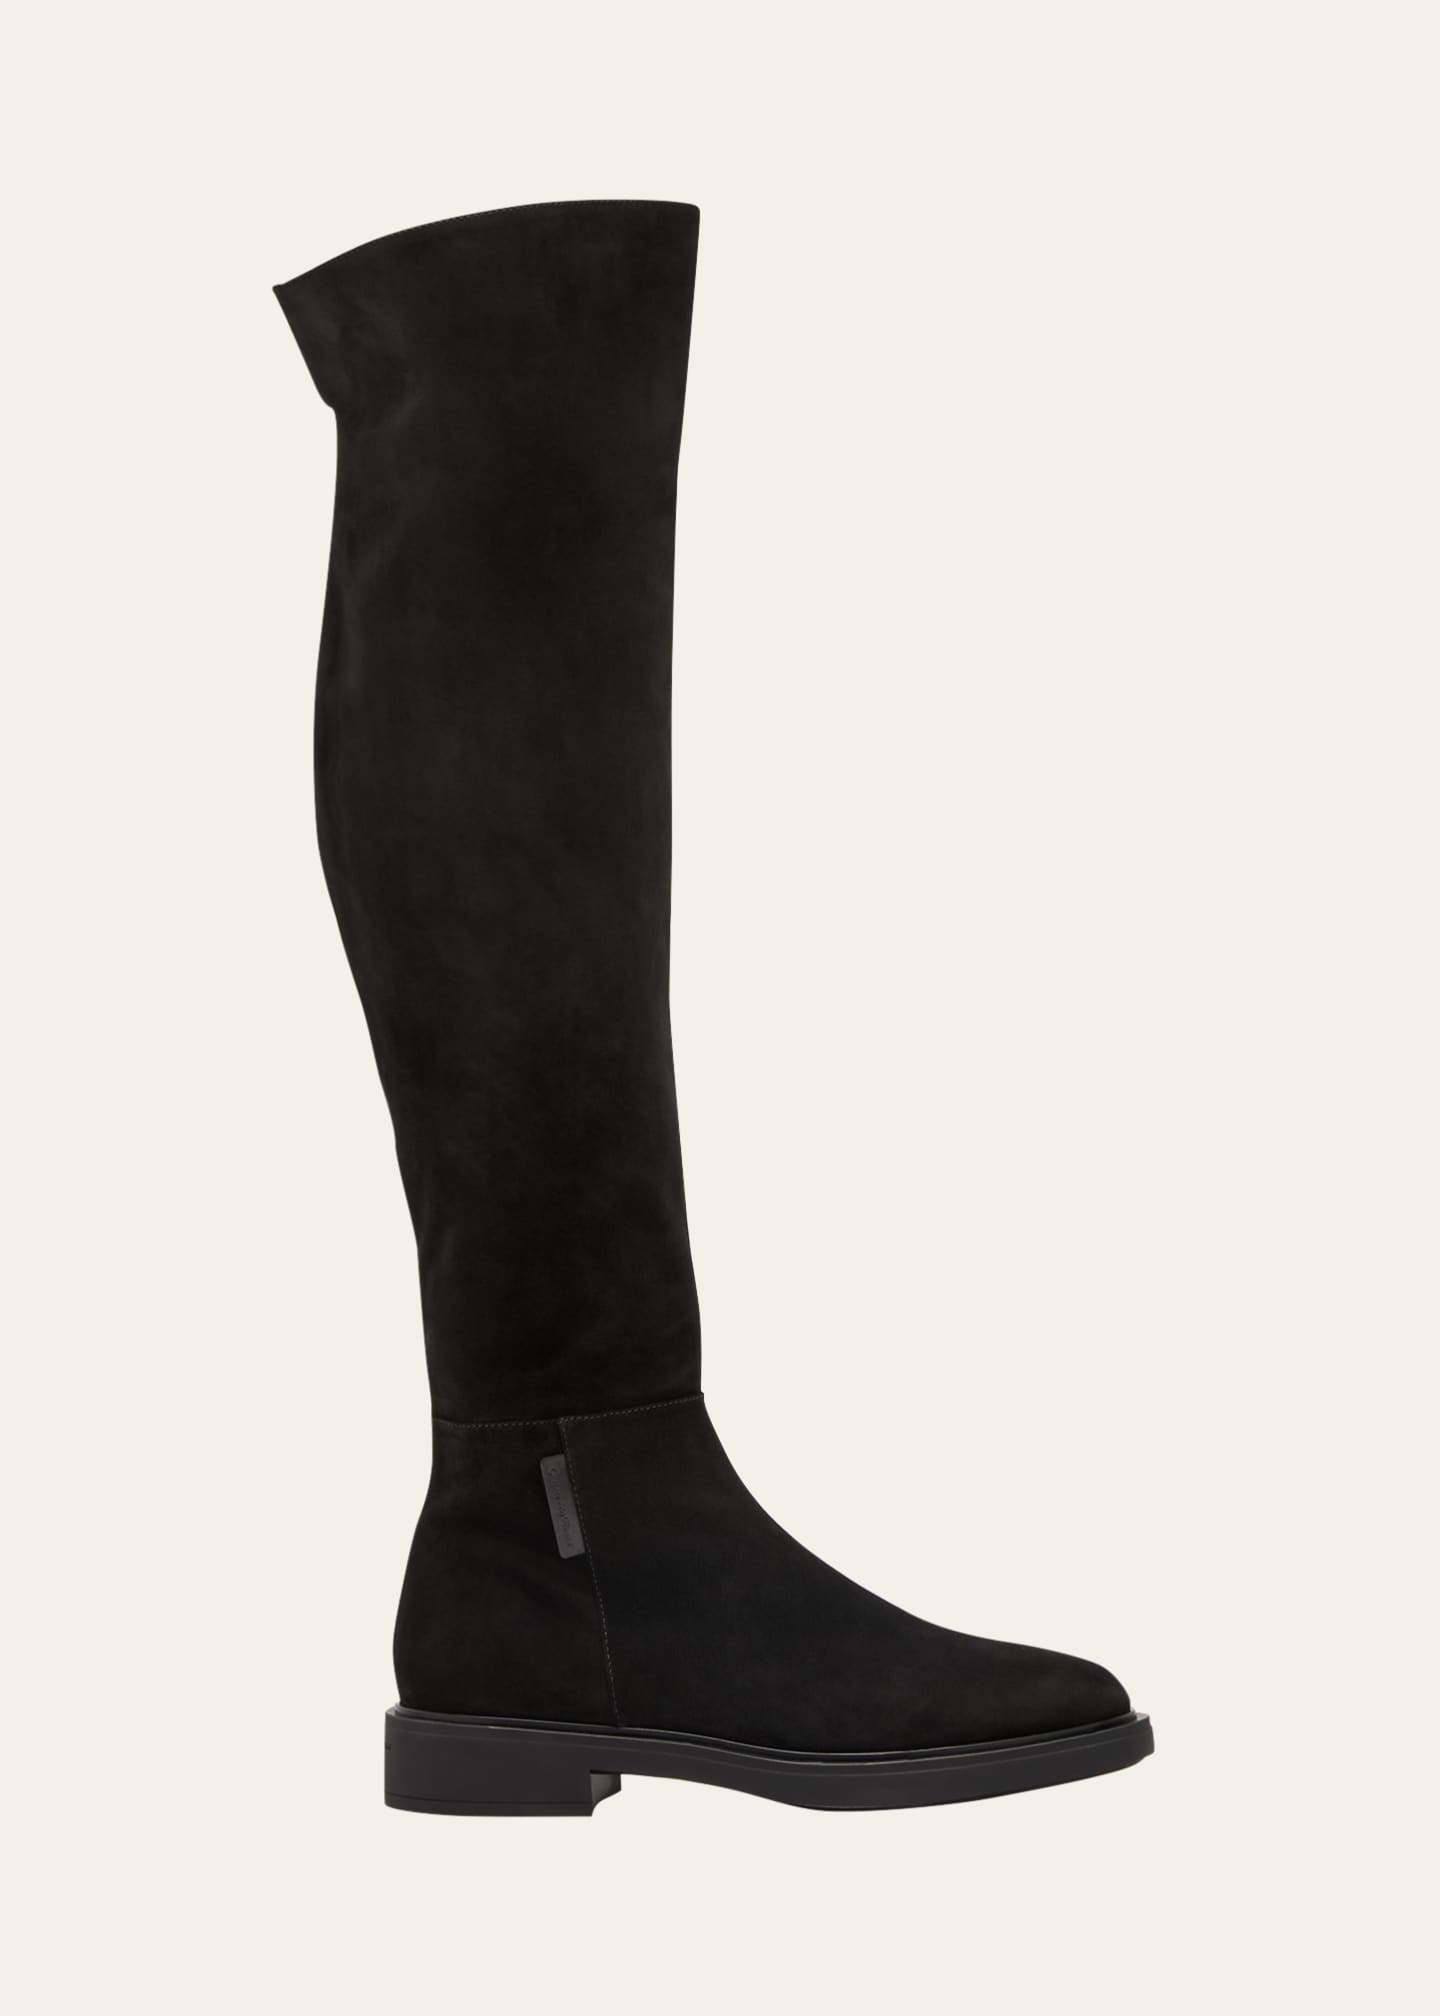 Gianvito Rossi Suede Over-The-Knee Boots - Bergdorf Goodman